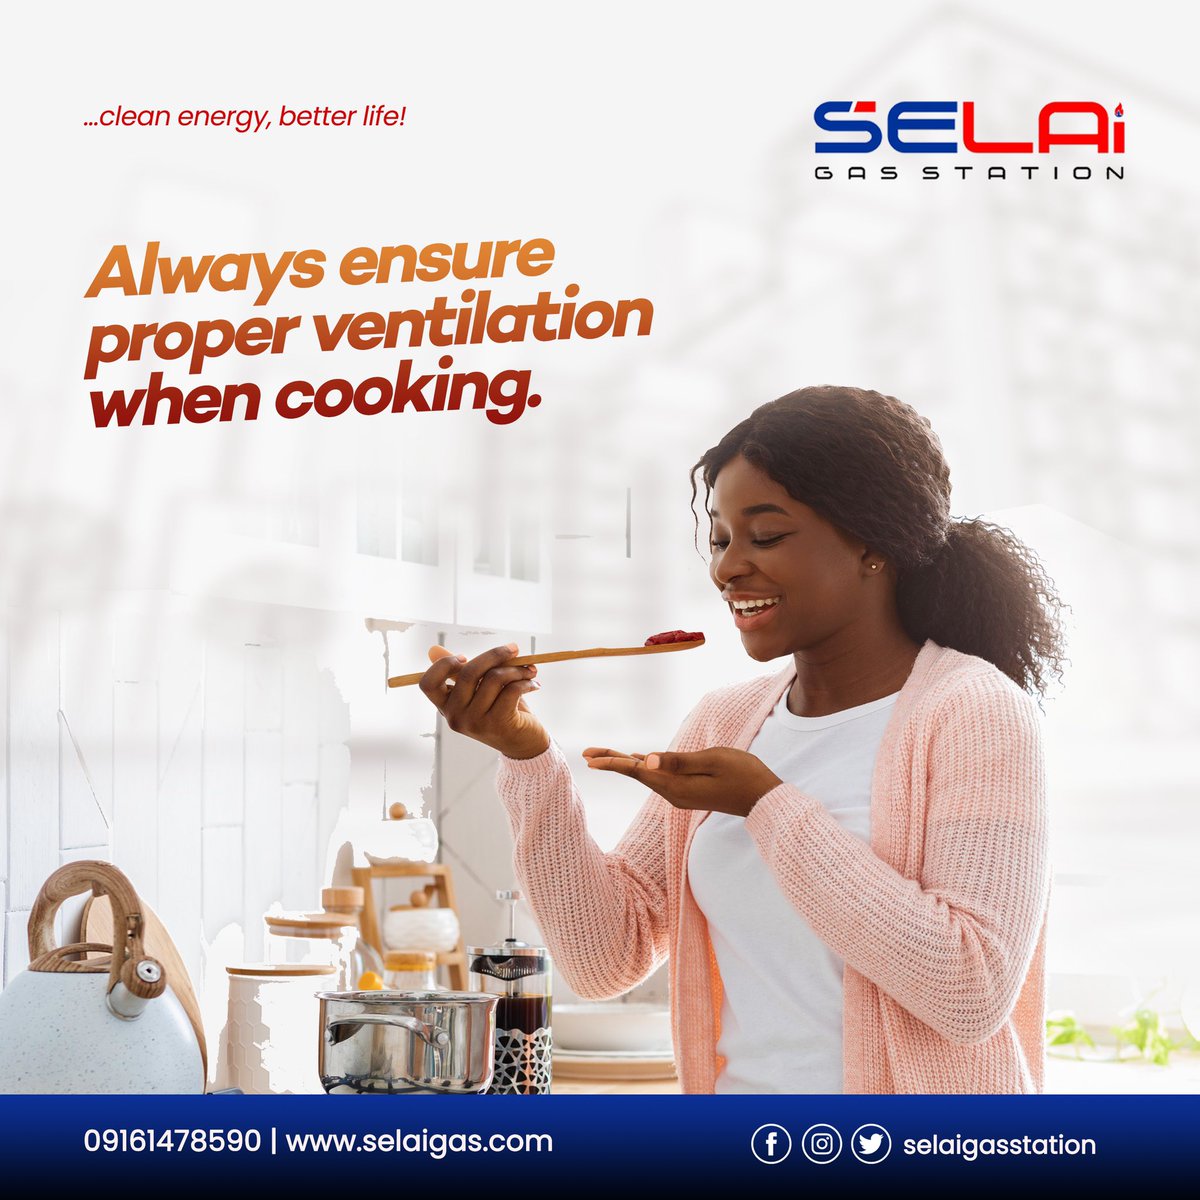 🔥🚀 Gas Tip: Safety First! 🚀🔥

Always ensure proper ventilation when using gas!

Keep your loved ones safe and happy! 

#GasSafety #SELAIGasTips #SELAIGas